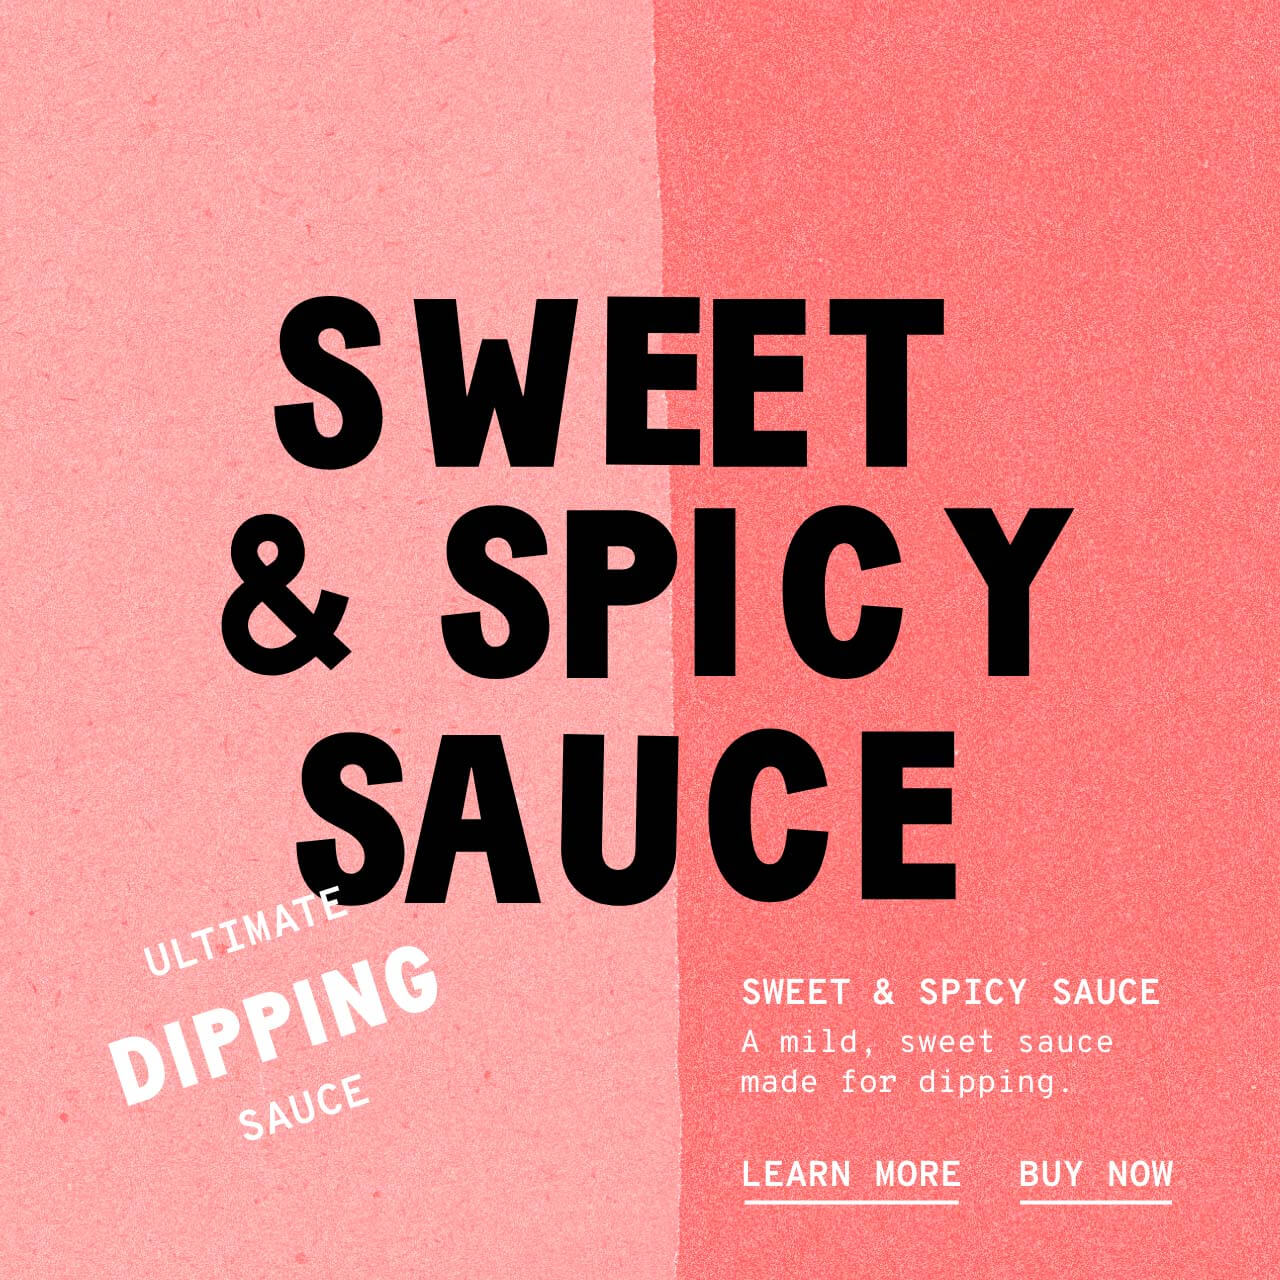 Sweet and Spicy Sauce - Description